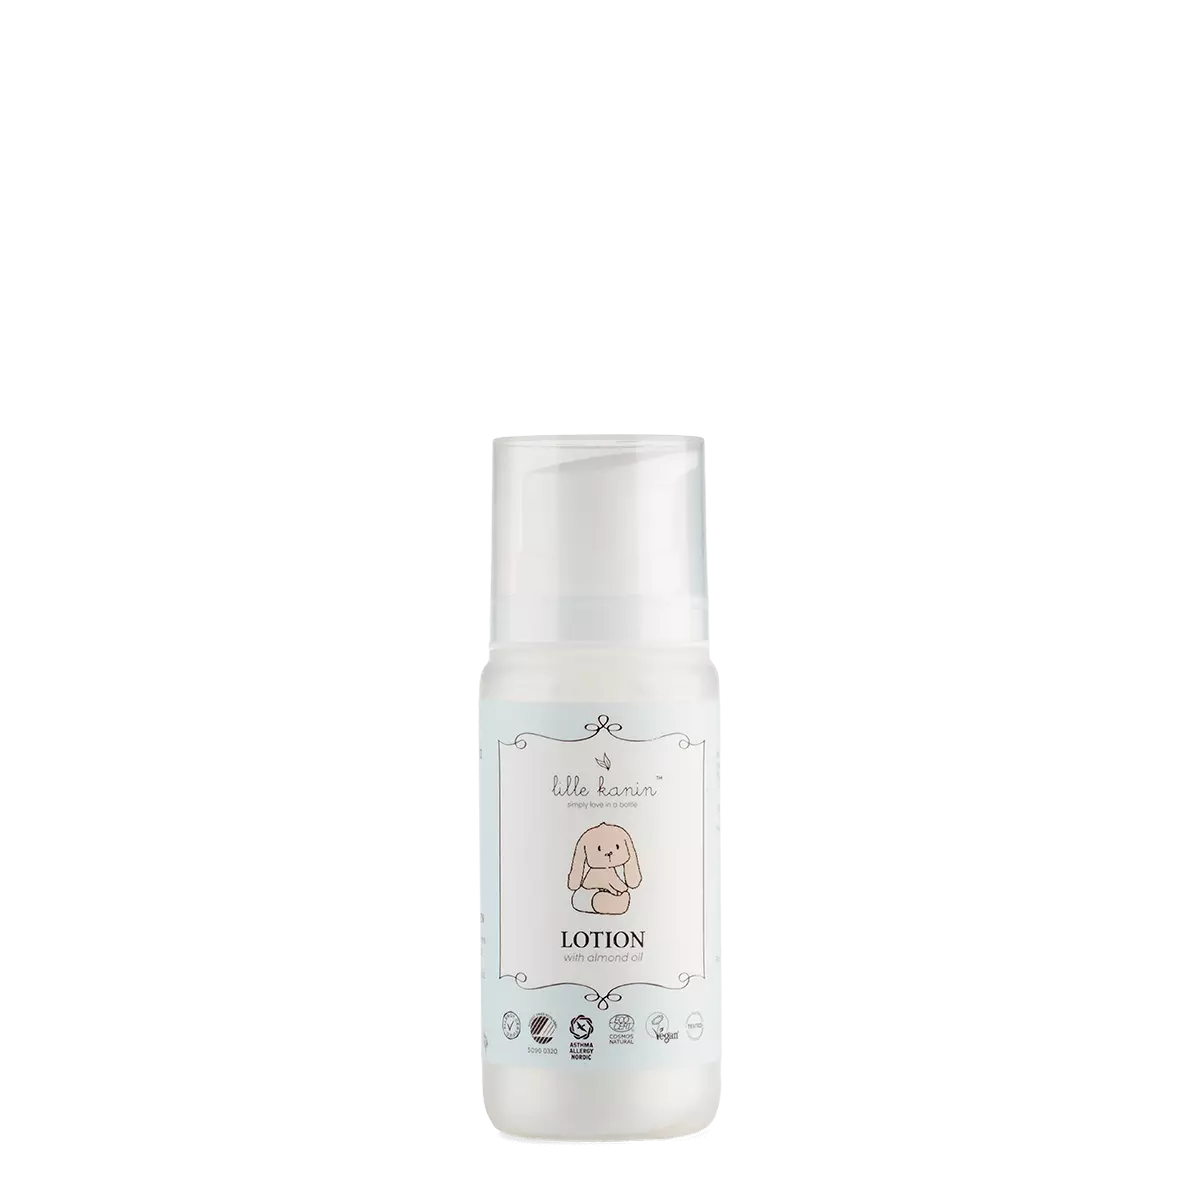 lille kanin lotion with lid on